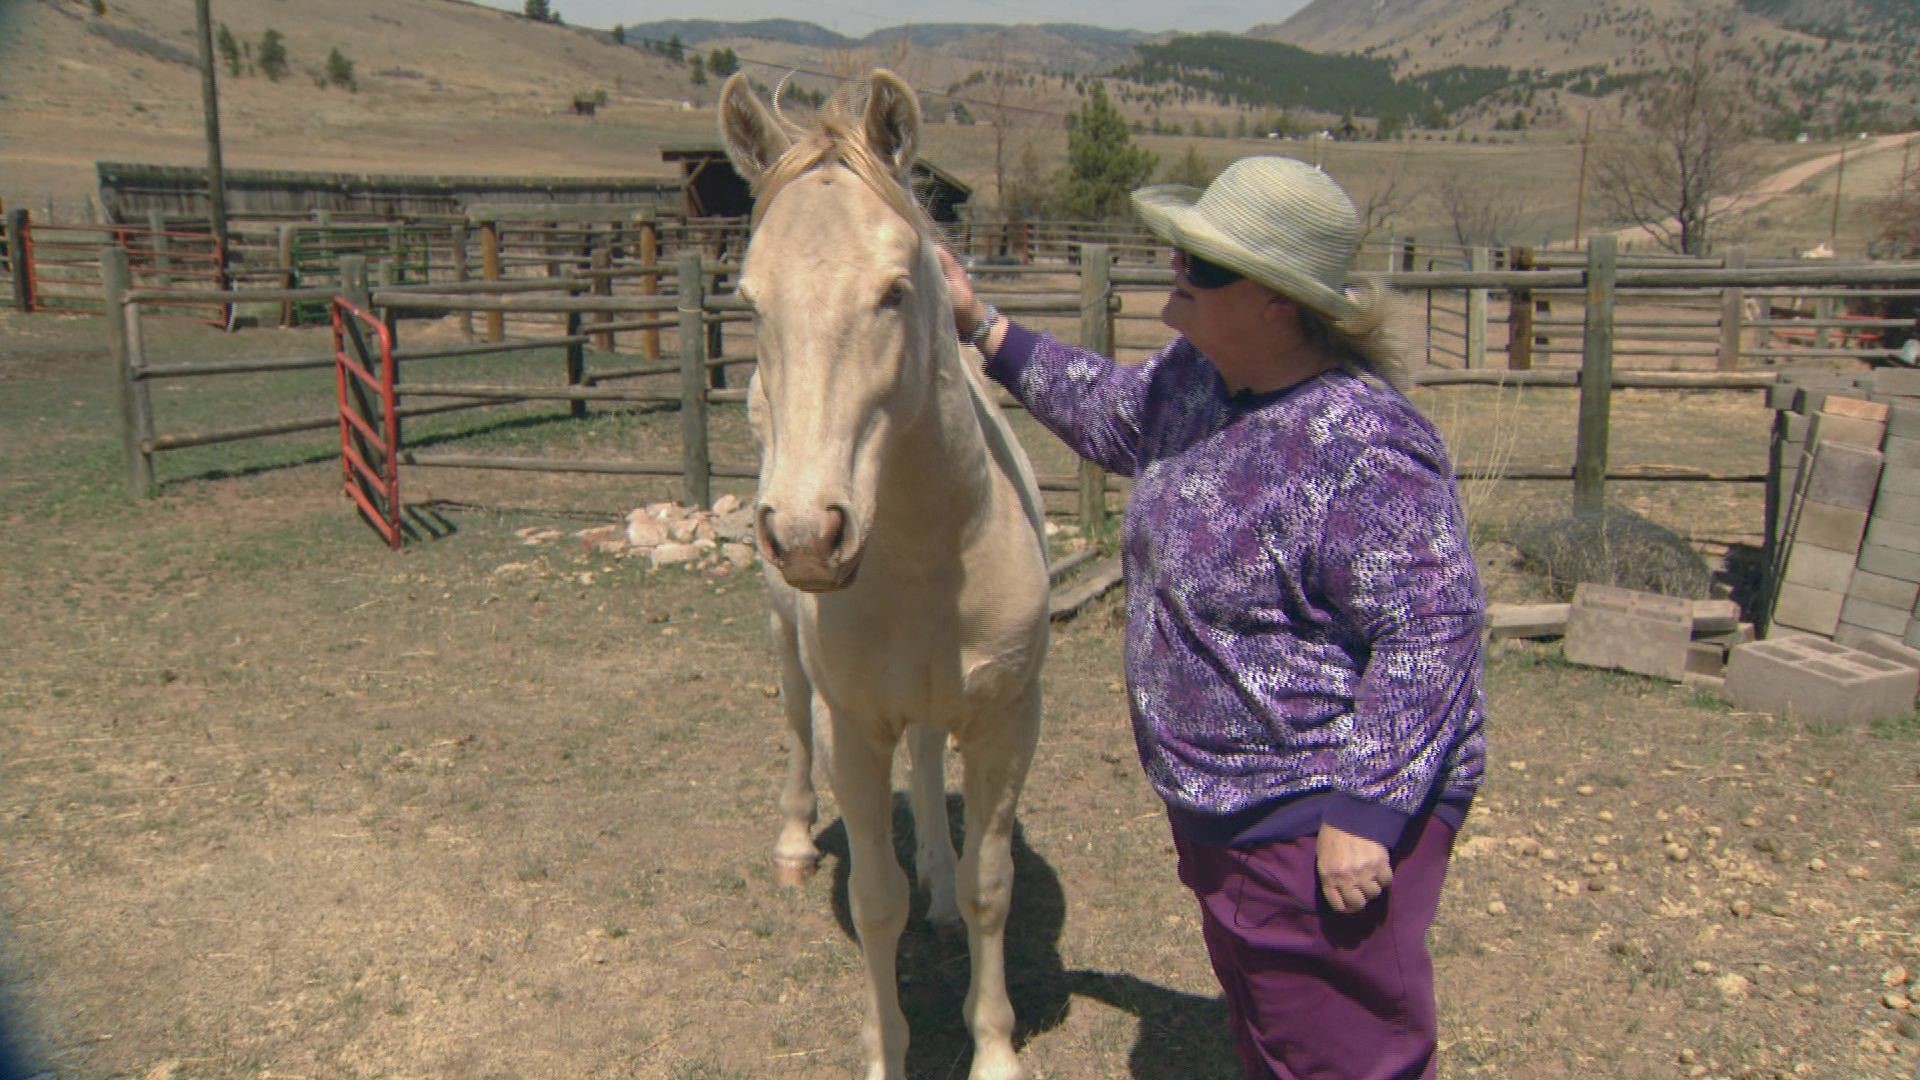 Carol Walker, a wild horse advocate, was concerned to hear about the deaths of dozens of horses. She adopted a young horse named Helios from the facility last fall.